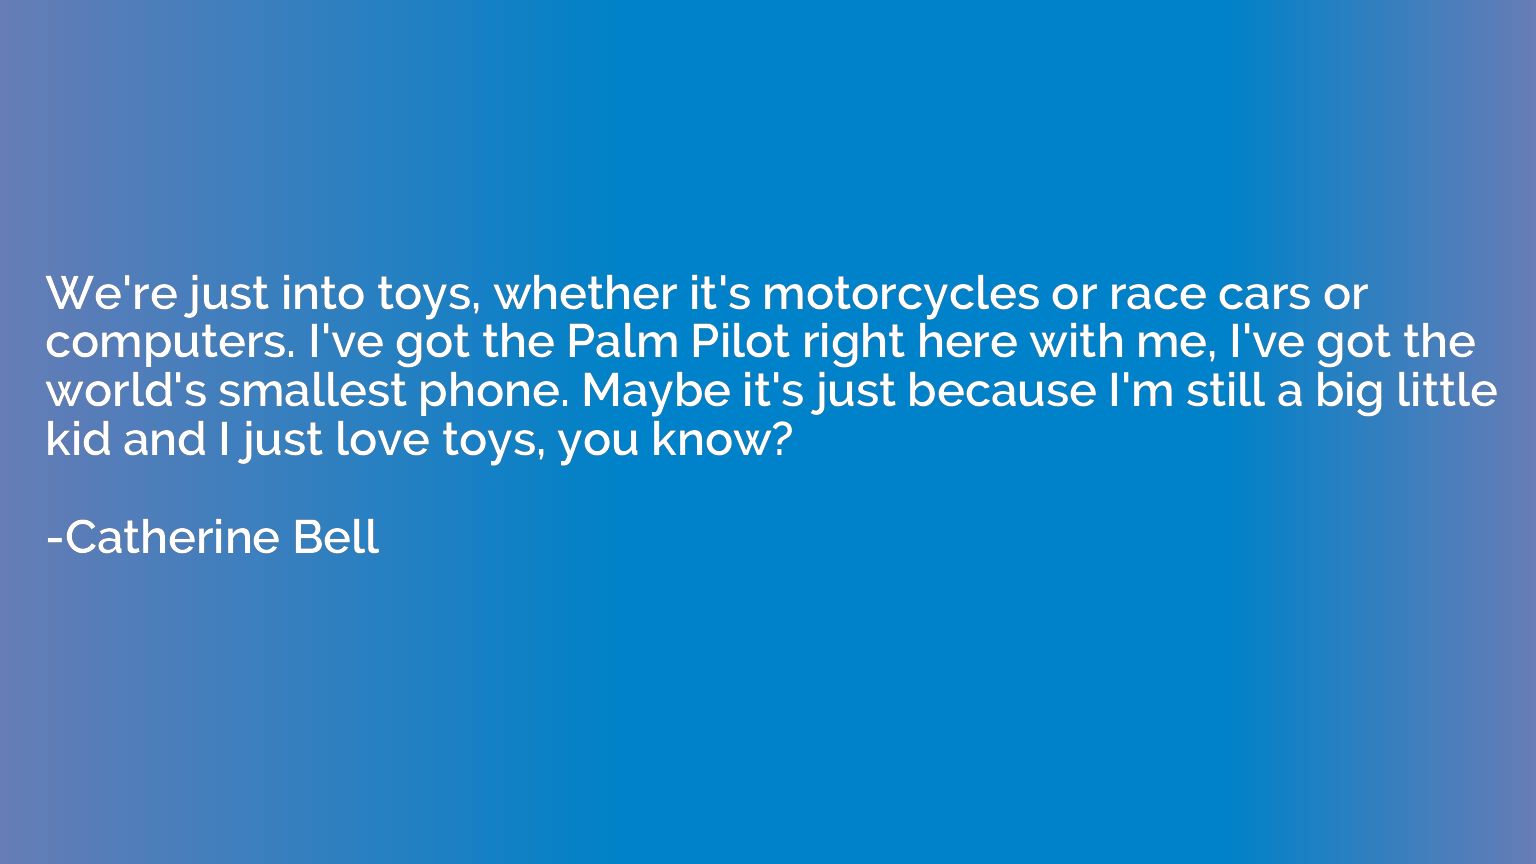 We're just into toys, whether it's motorcycles or race cars 